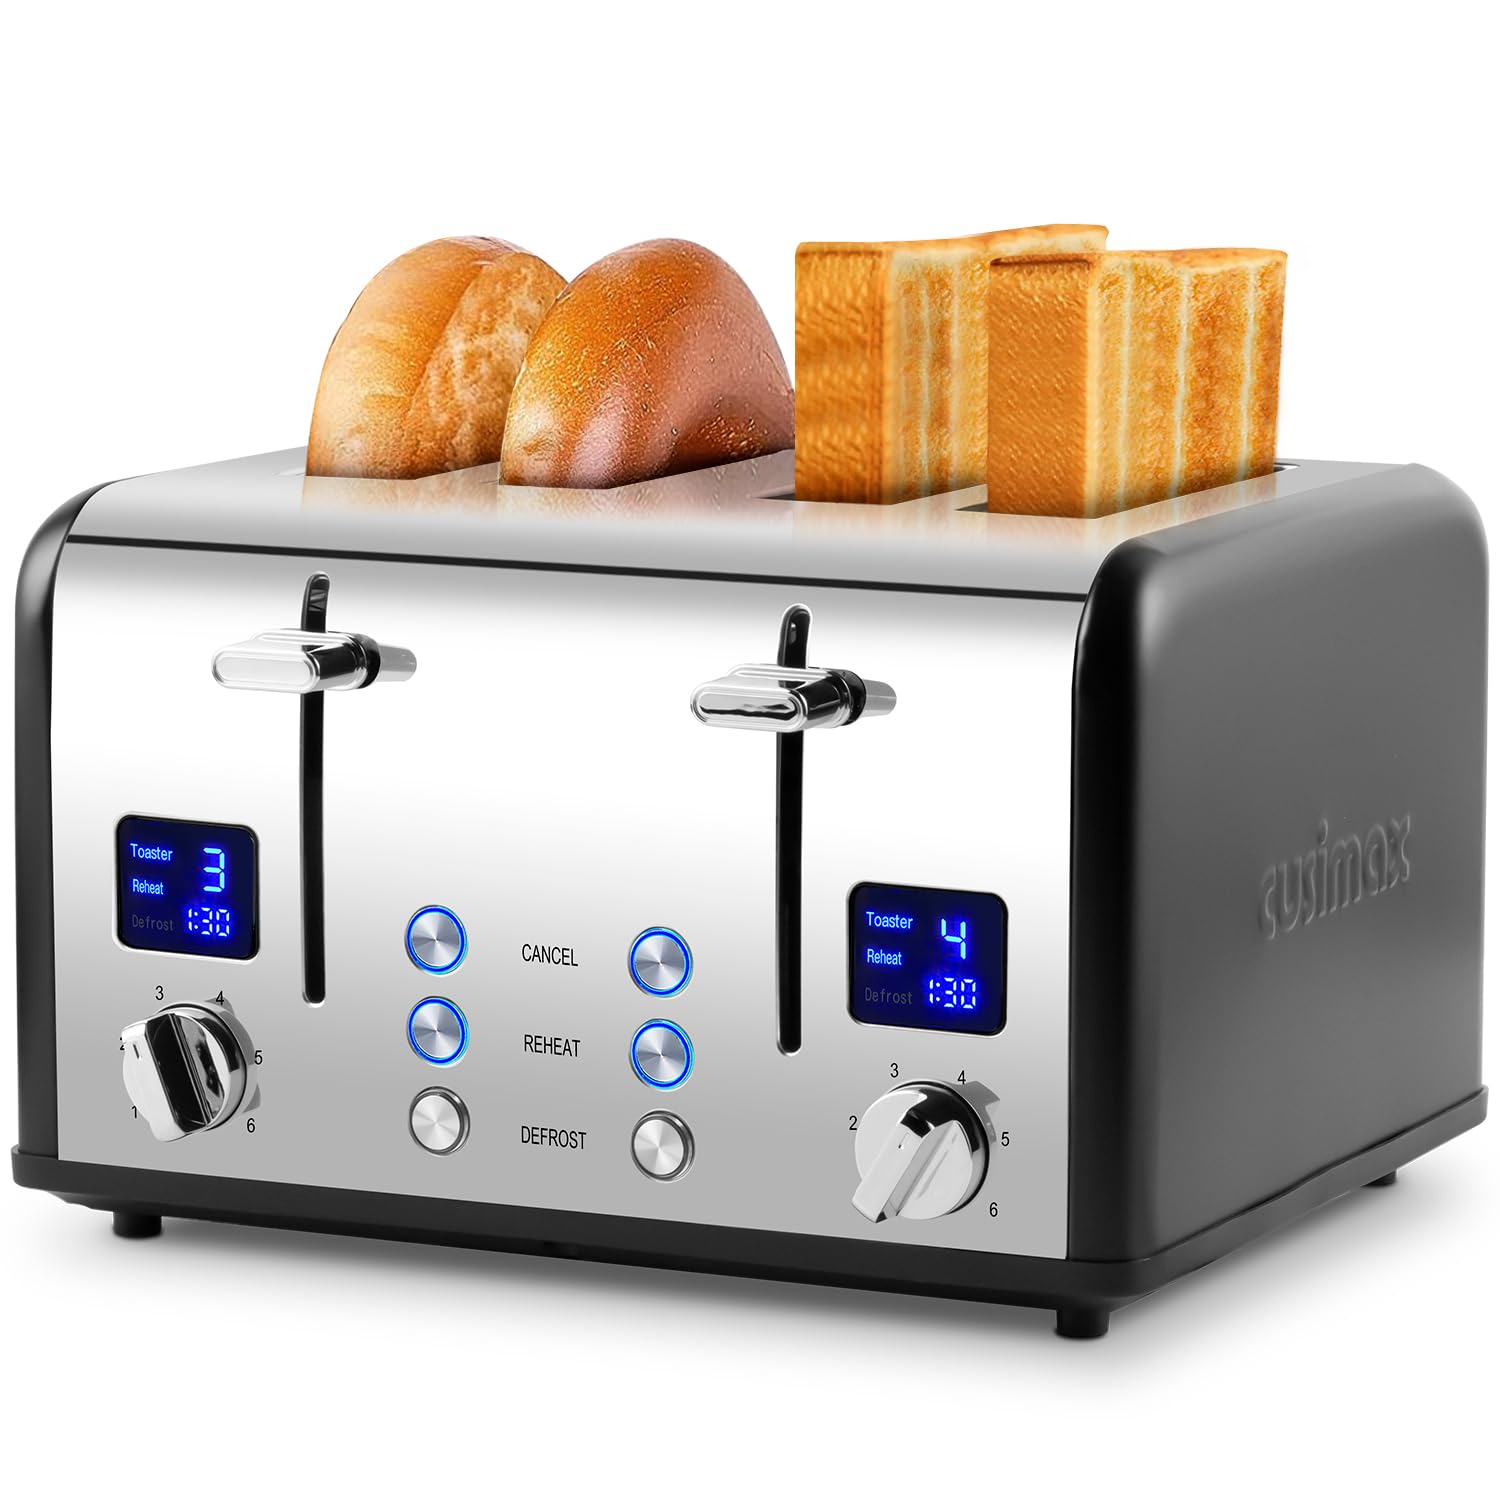 Large Stainless Steel 4 Slice Toaster Extra Wide Slots Bread with Warmer  Heat